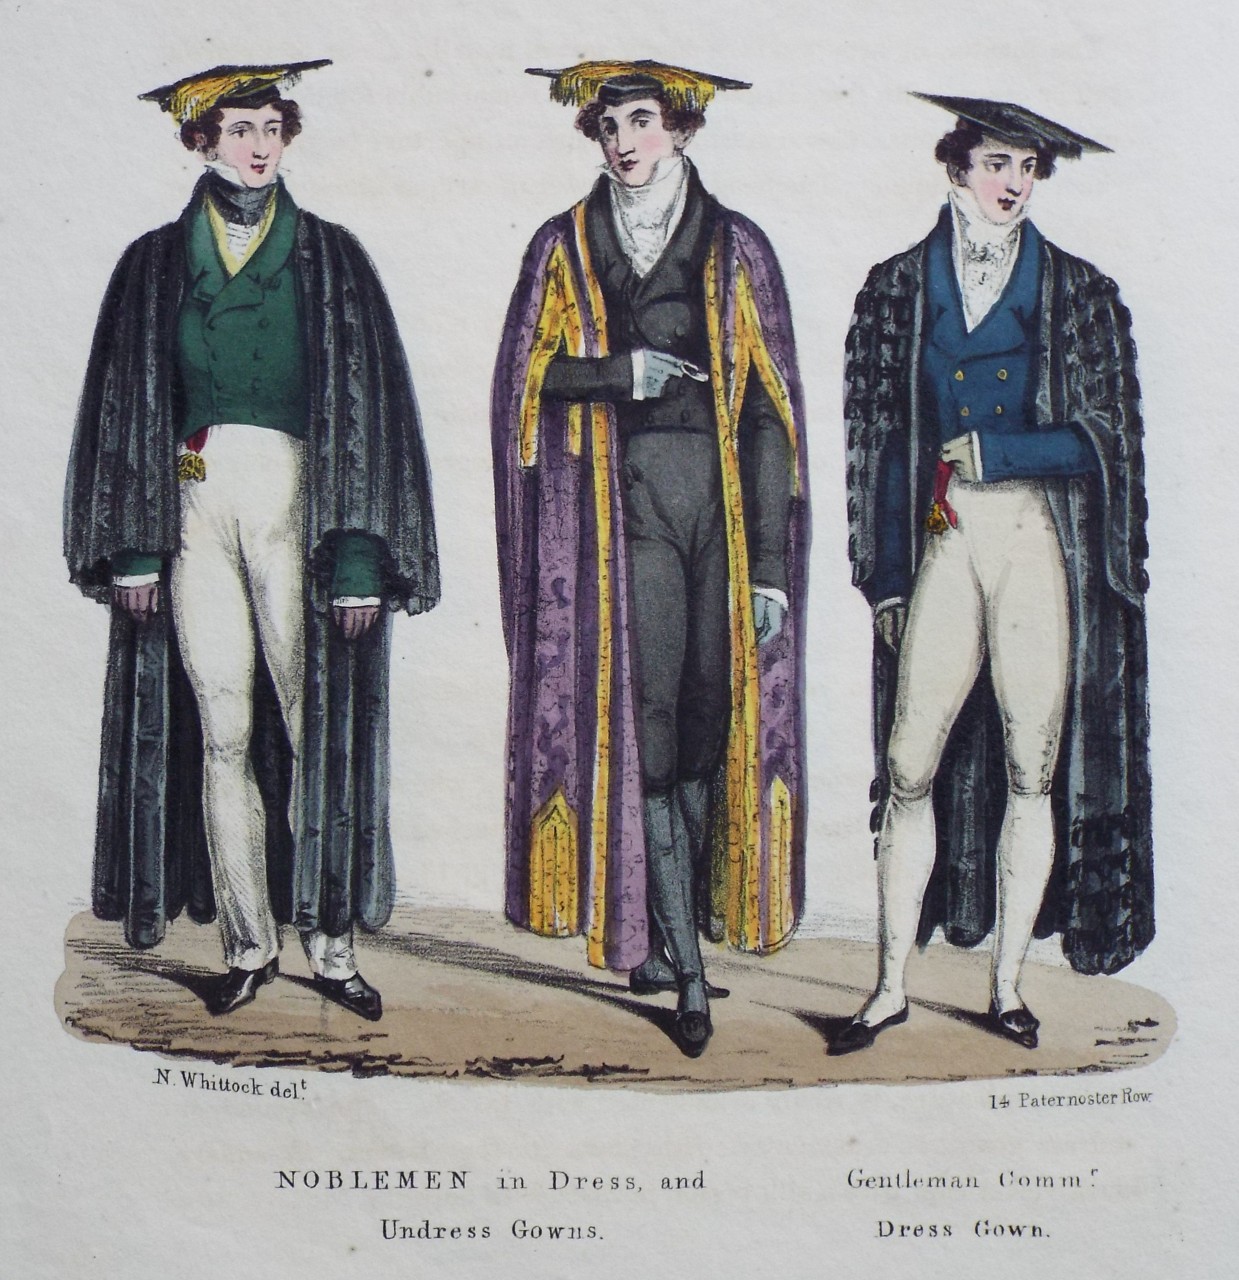 Lithograph - Noblemen in Dress and Undress Gowns. Gentleman Commr. Dress Gown.